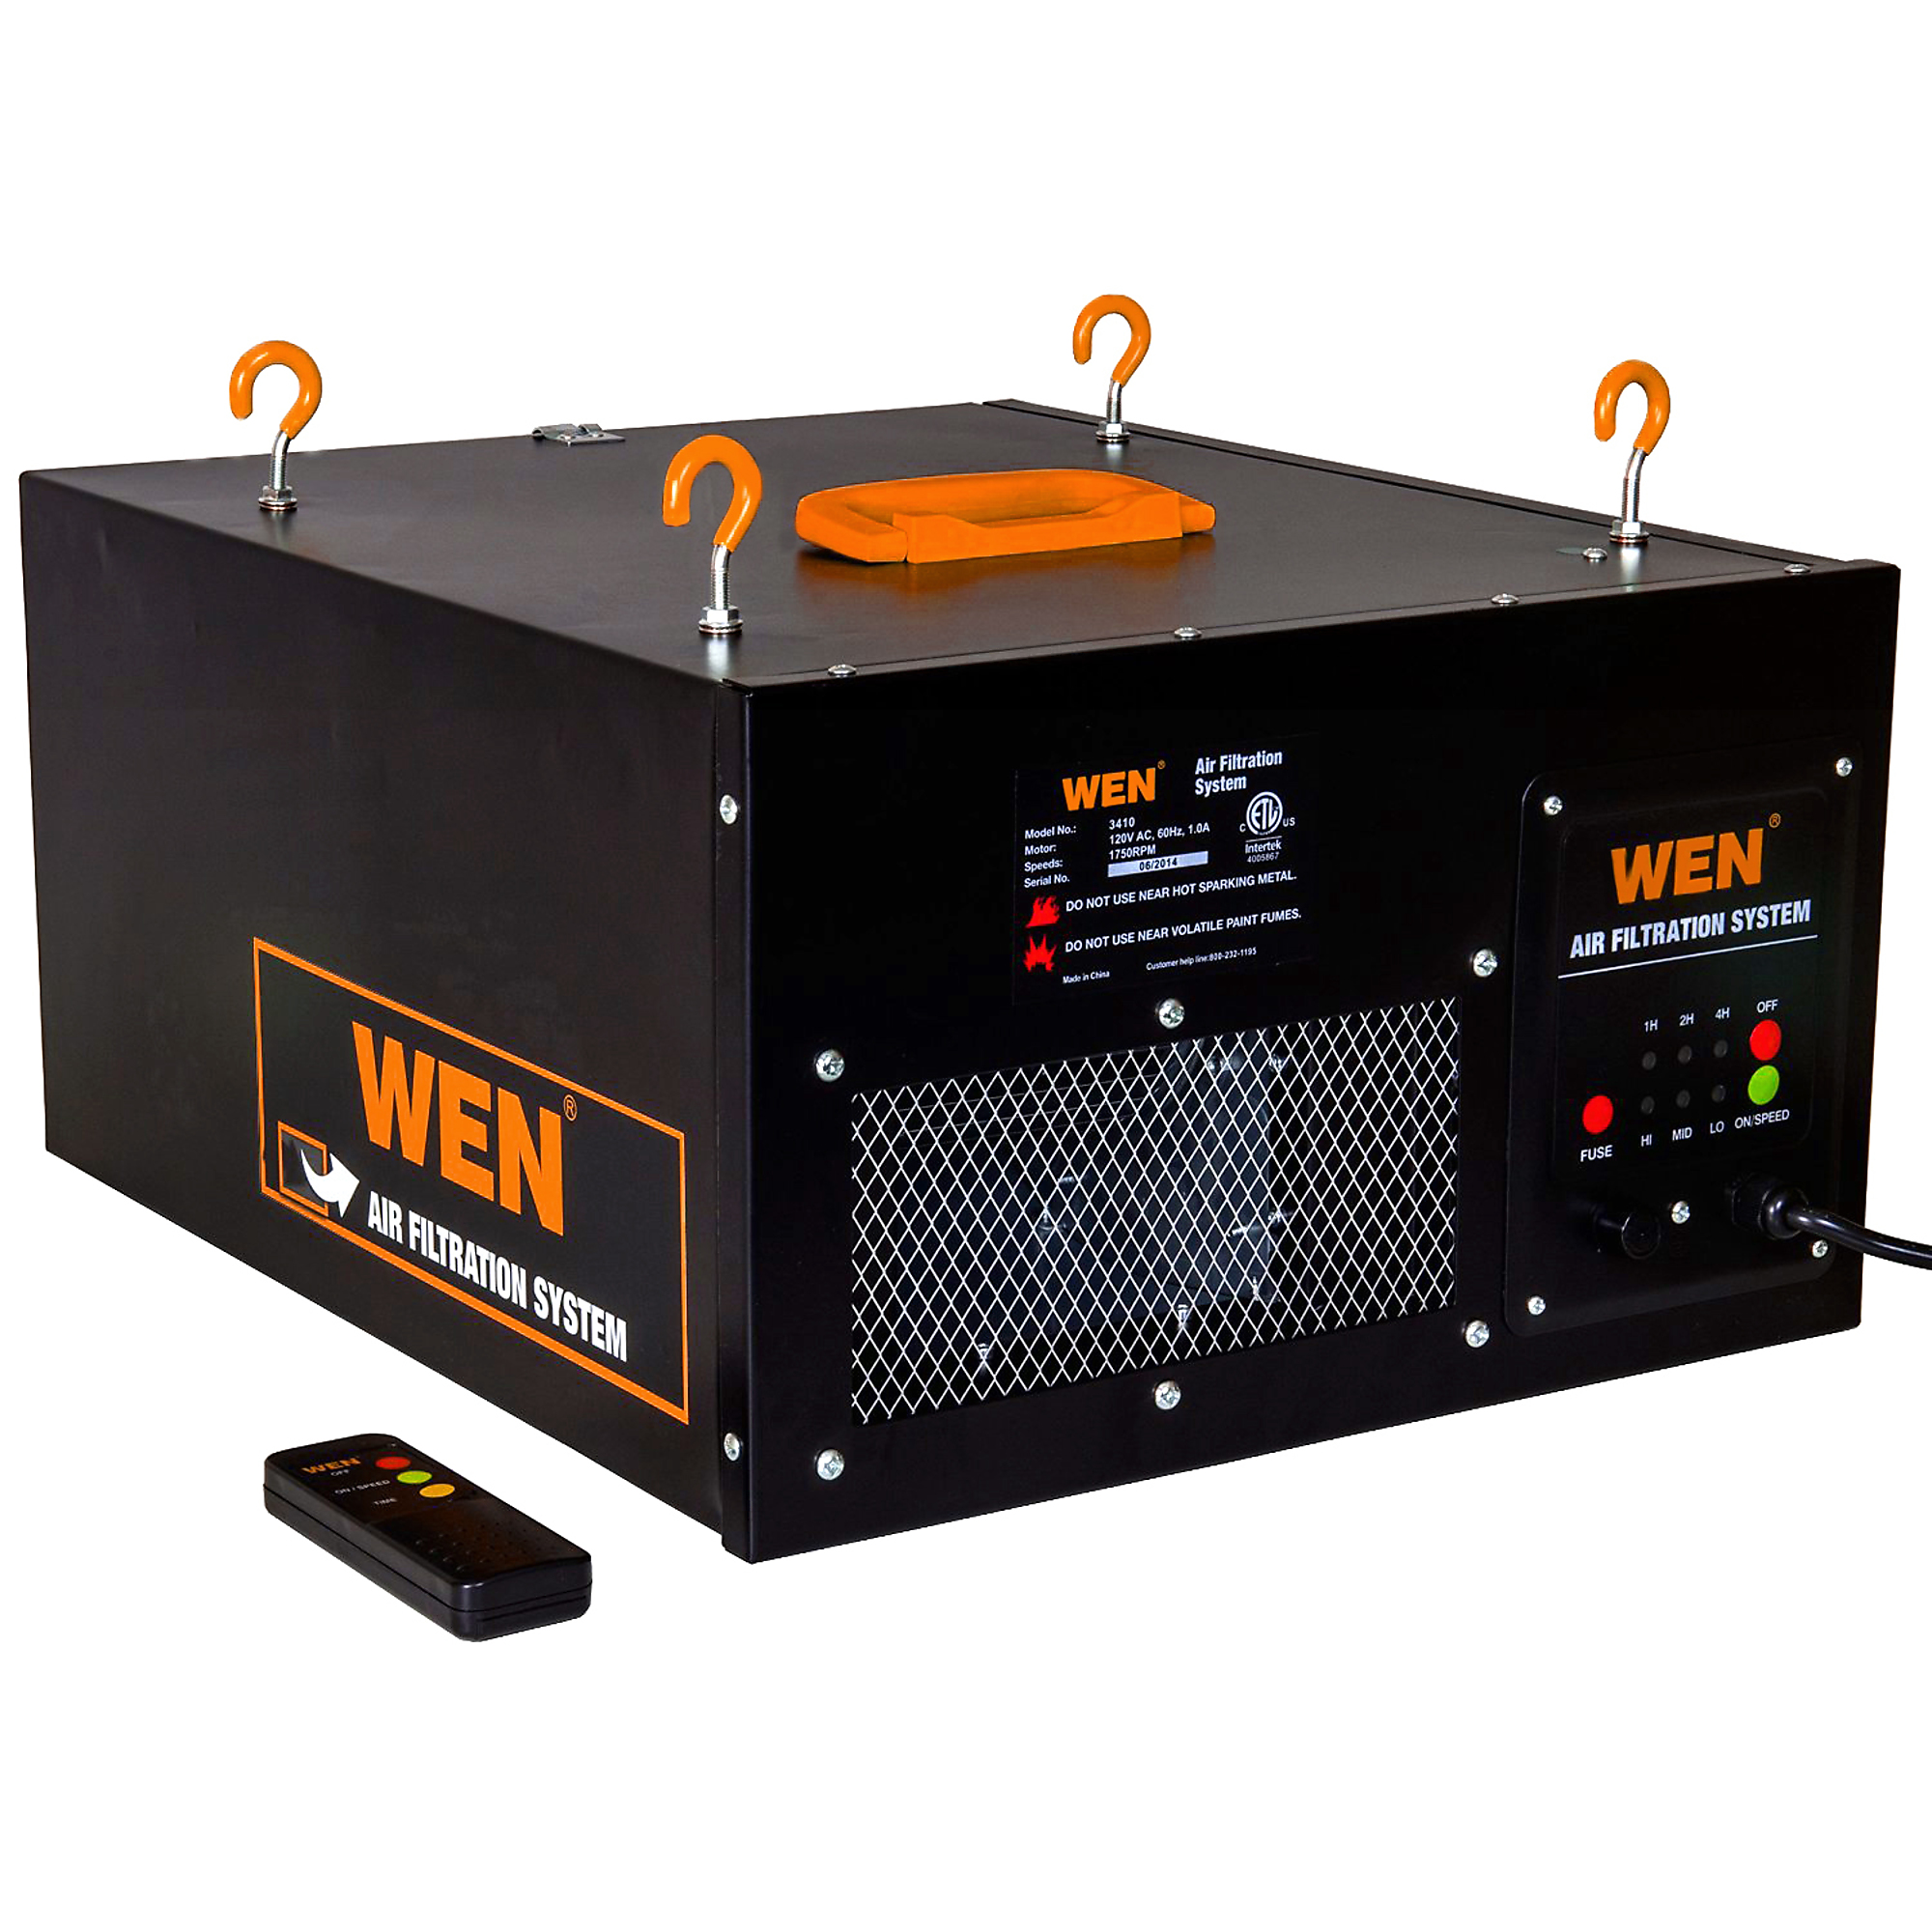 WEN, 3-Speed Remote-Controlled Air Filtration System, Model 3410